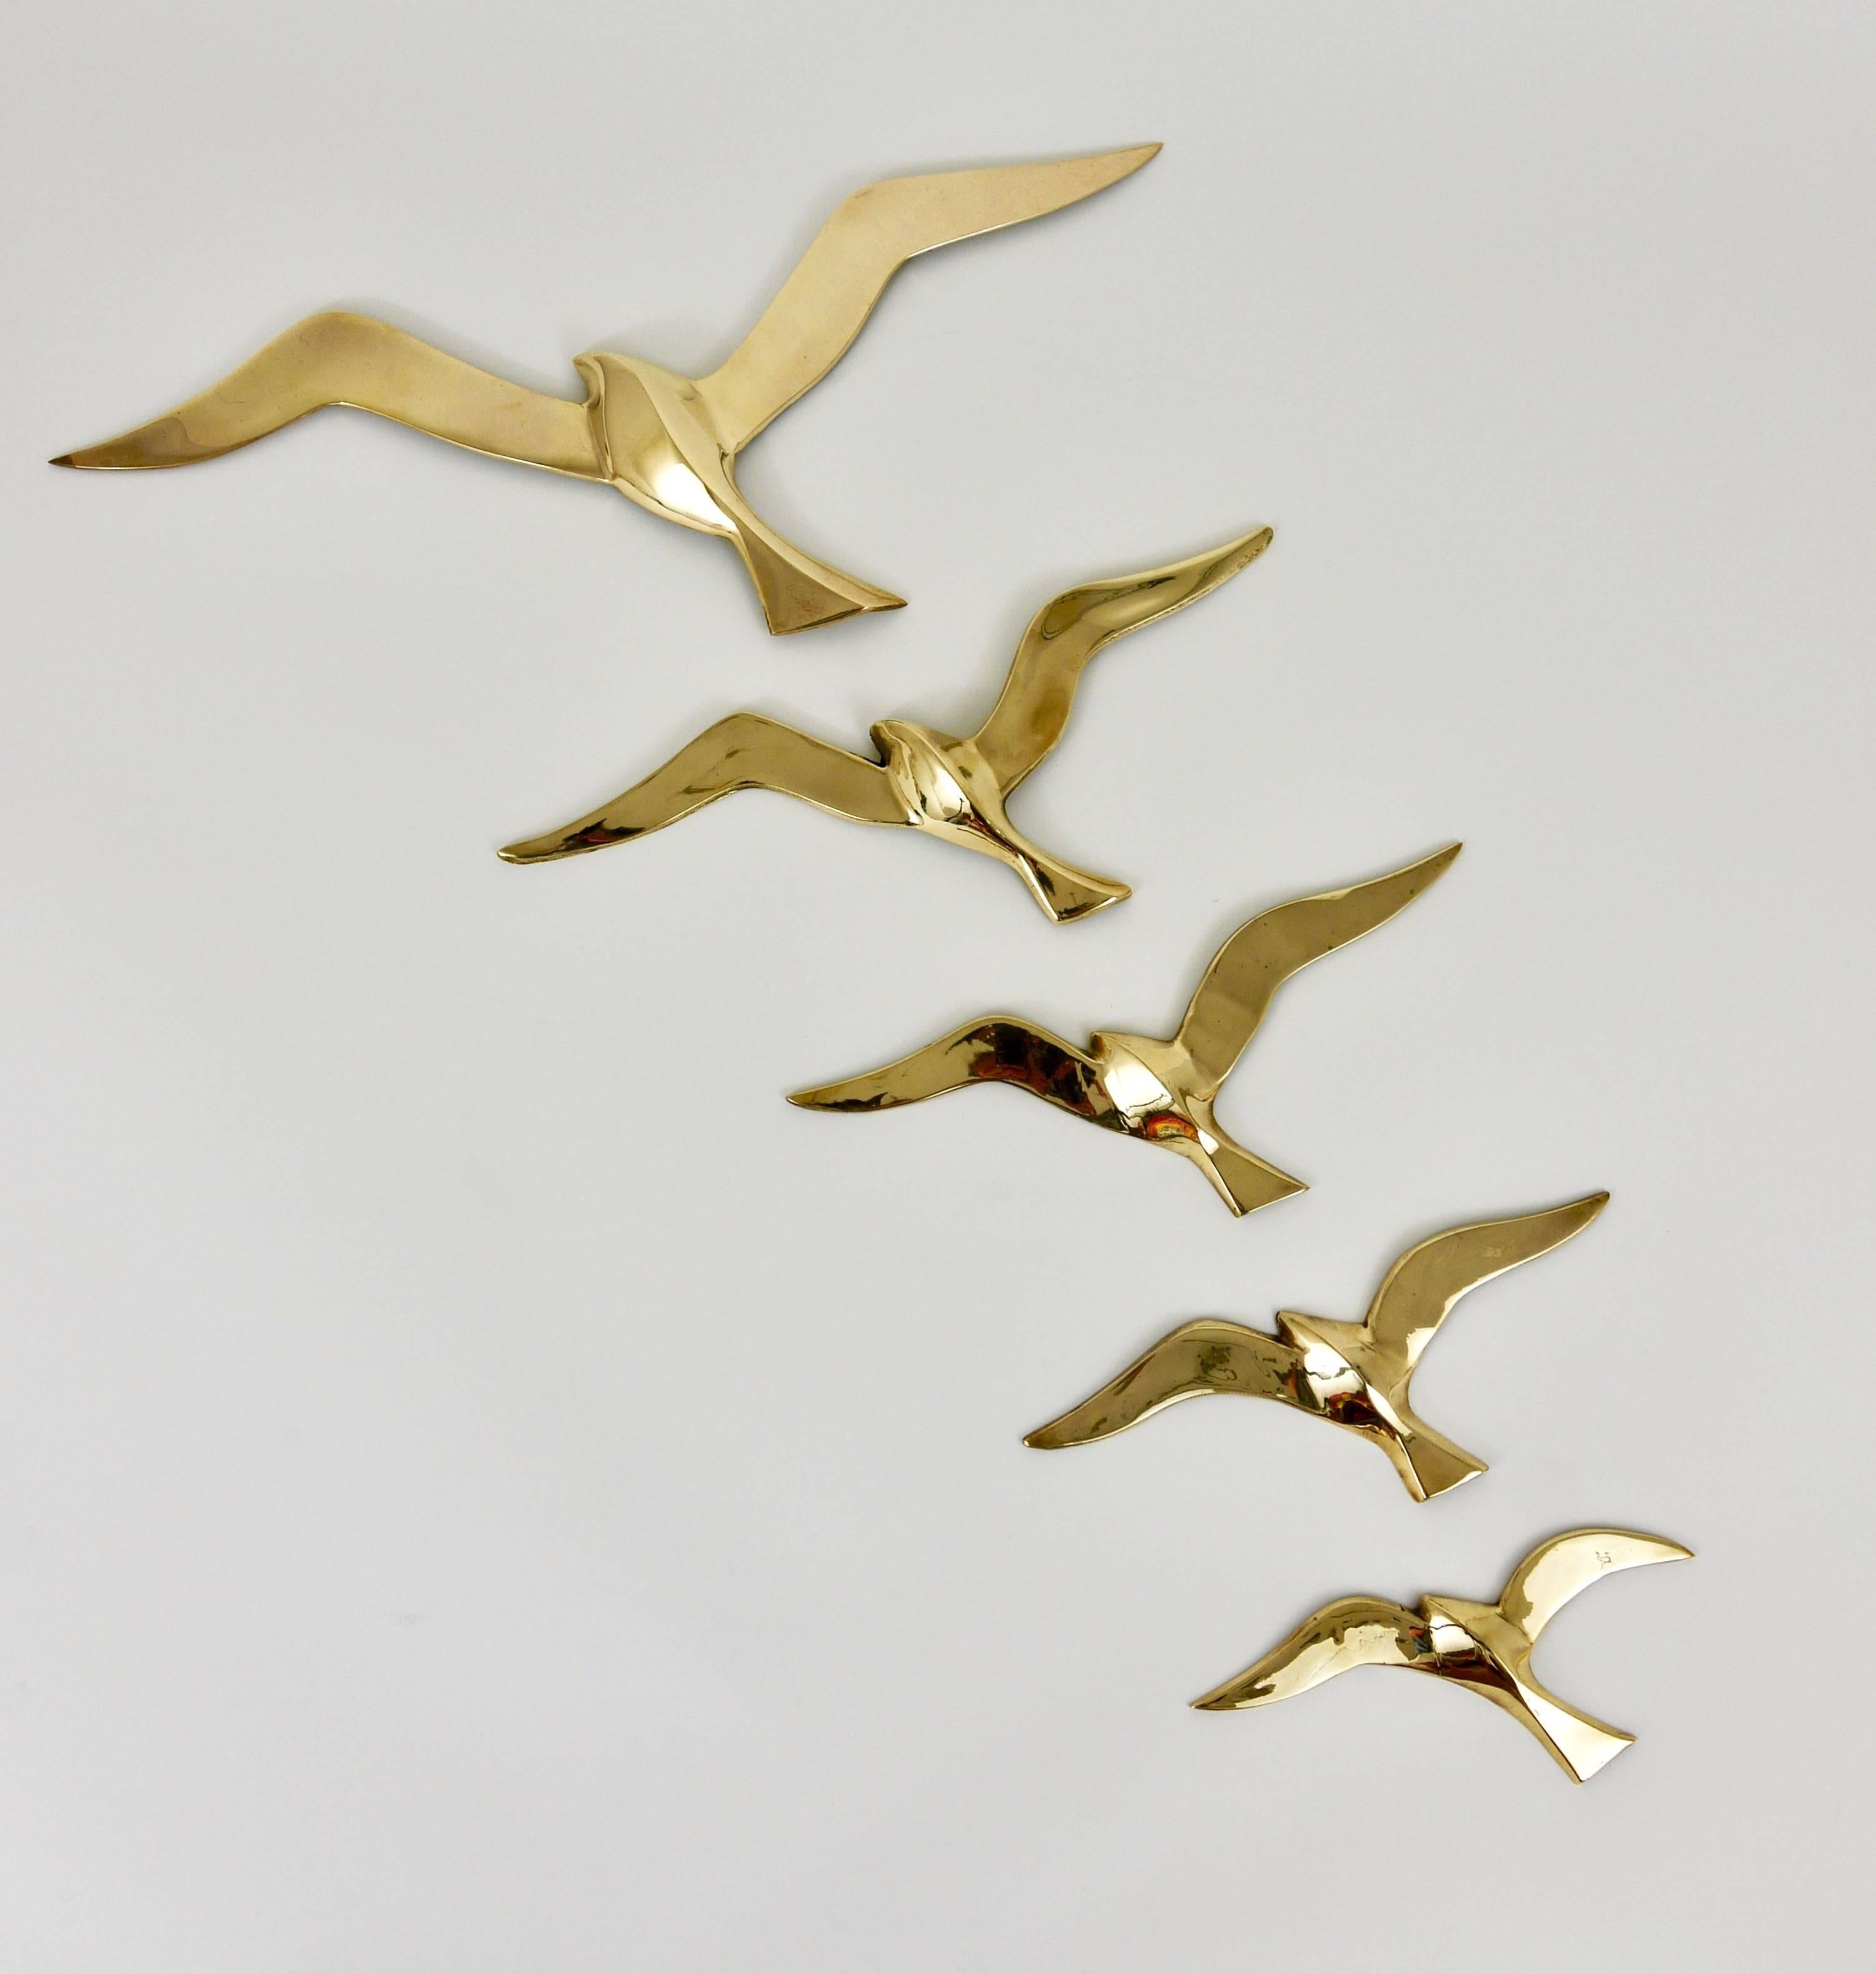 A set of five lovely wall-mounted modernist birds / gulls. Handmade of brass in the 1950s in Austria. Gently polished, in excellent condition. The biggest bird is 20 inch wide.
Width of the birds: 20/14/12/10/8 inch.